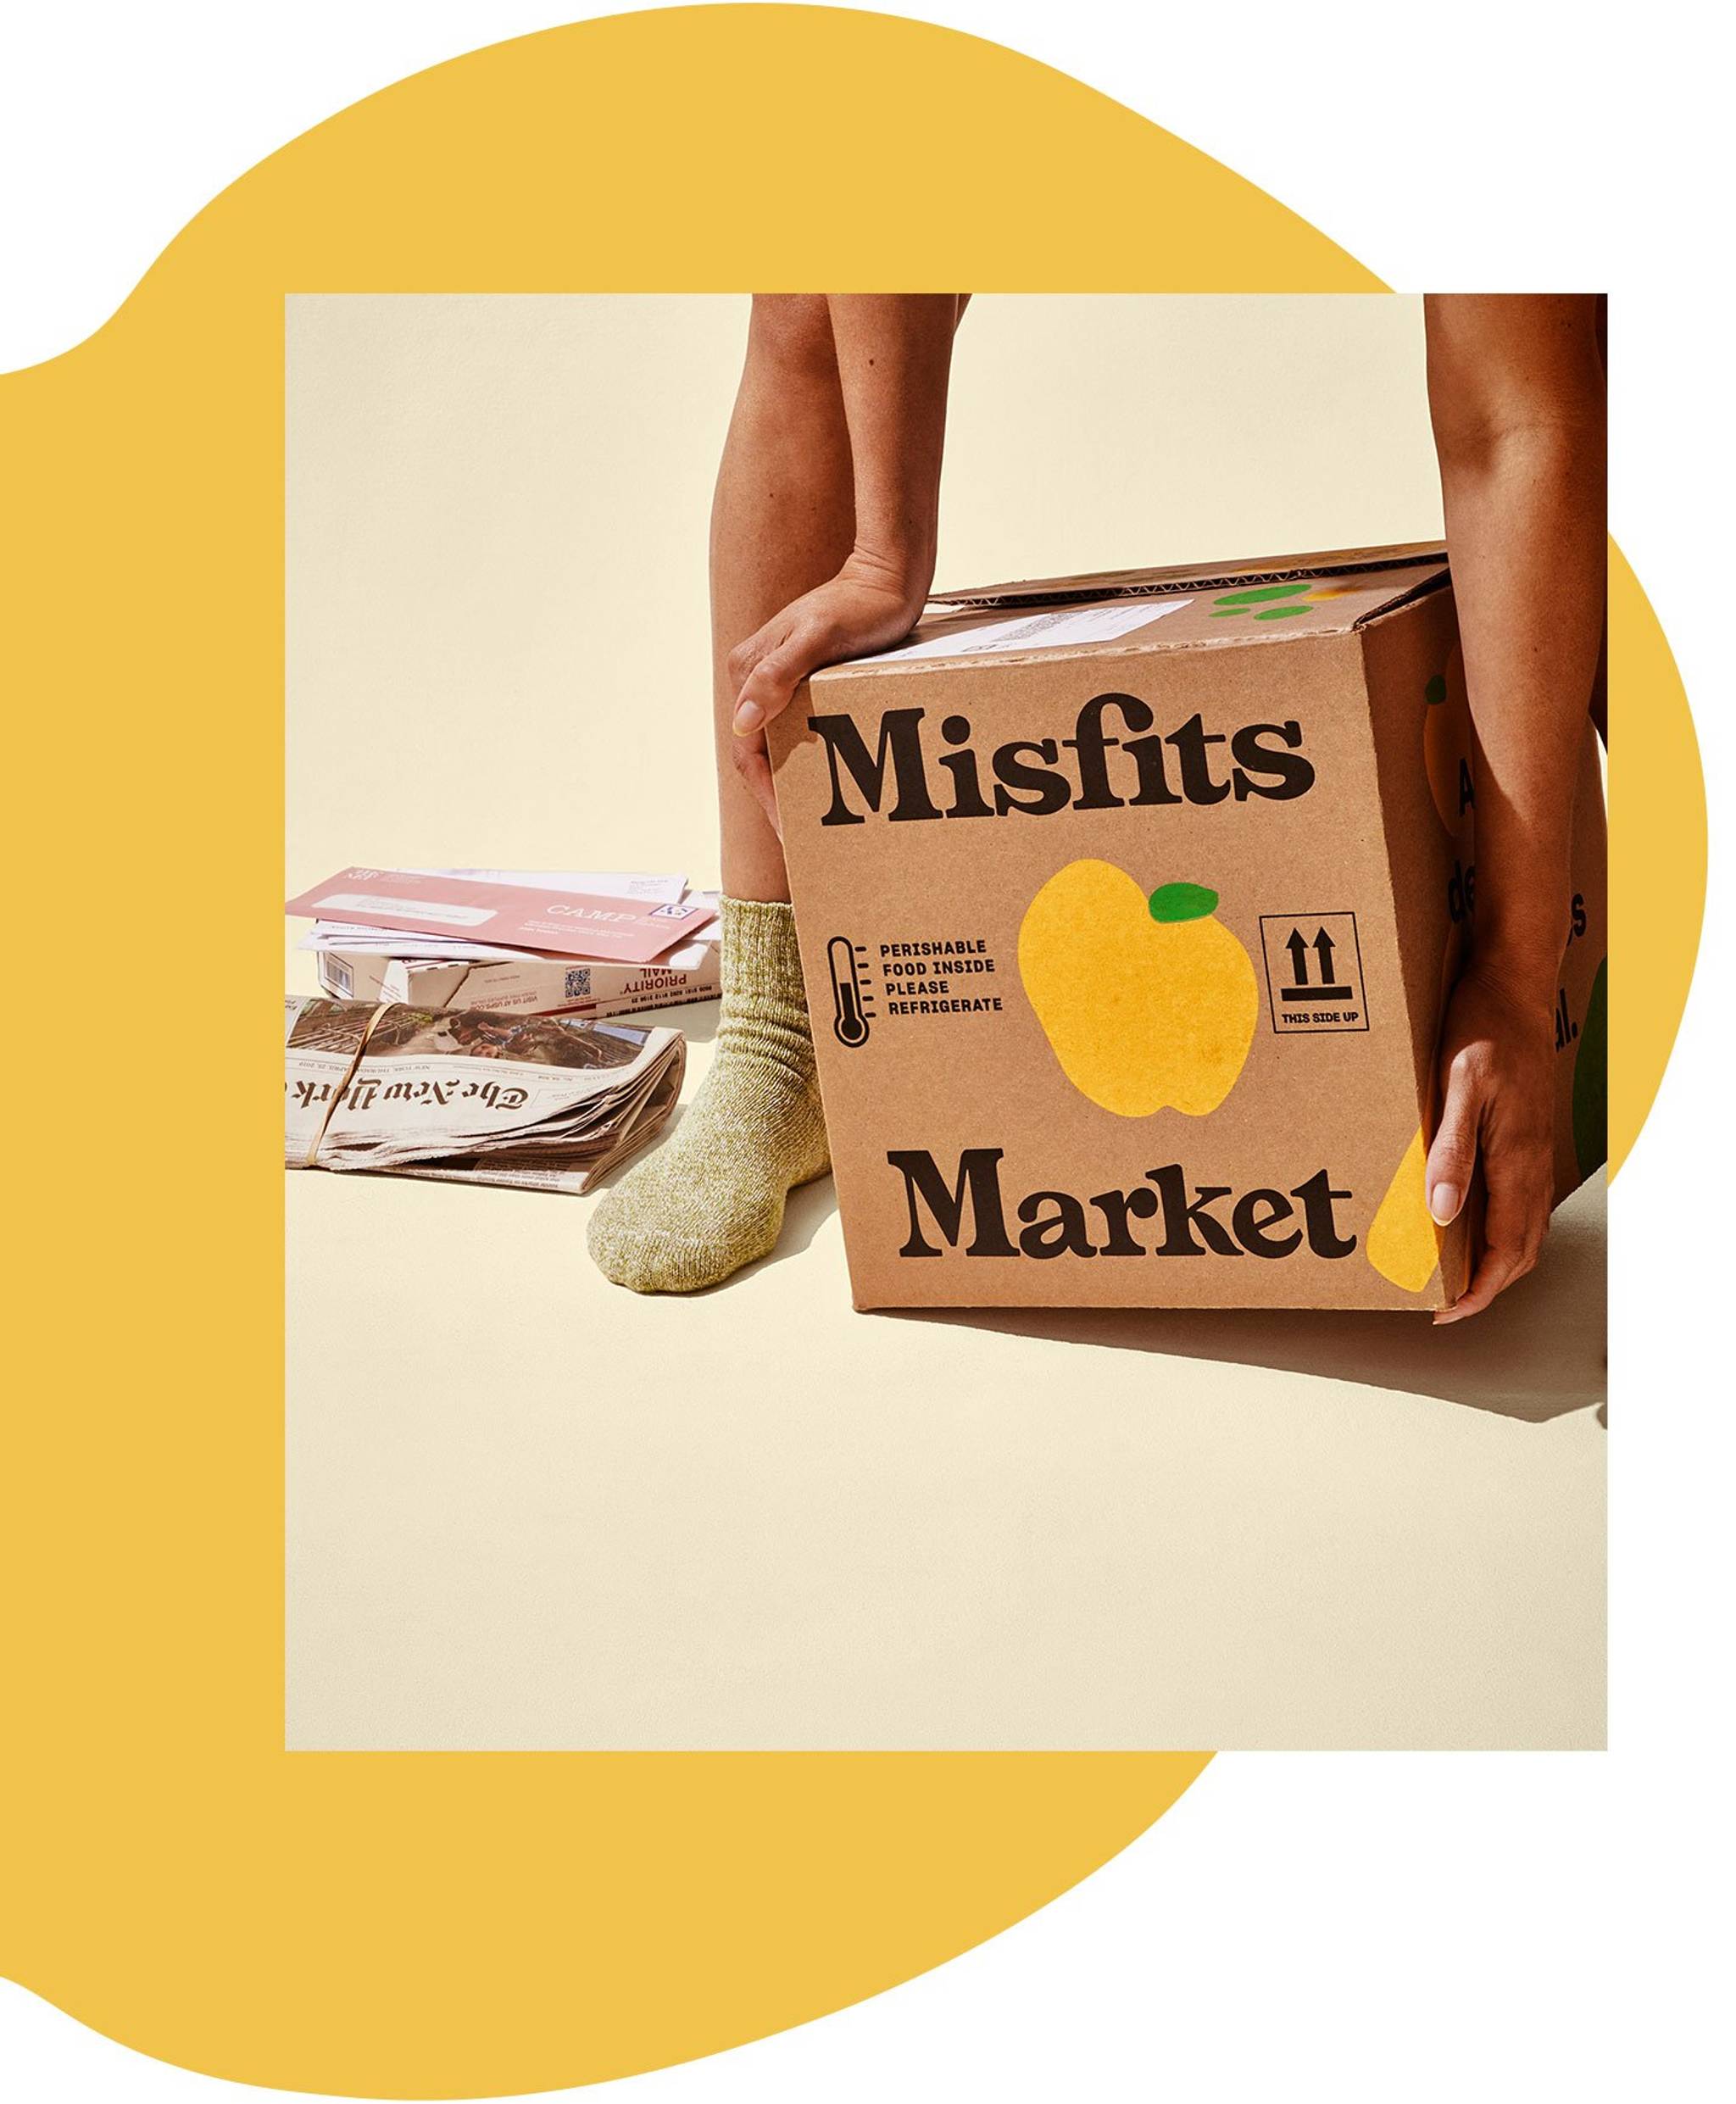 Misfits Market: ugly produce that’s easy to stomach